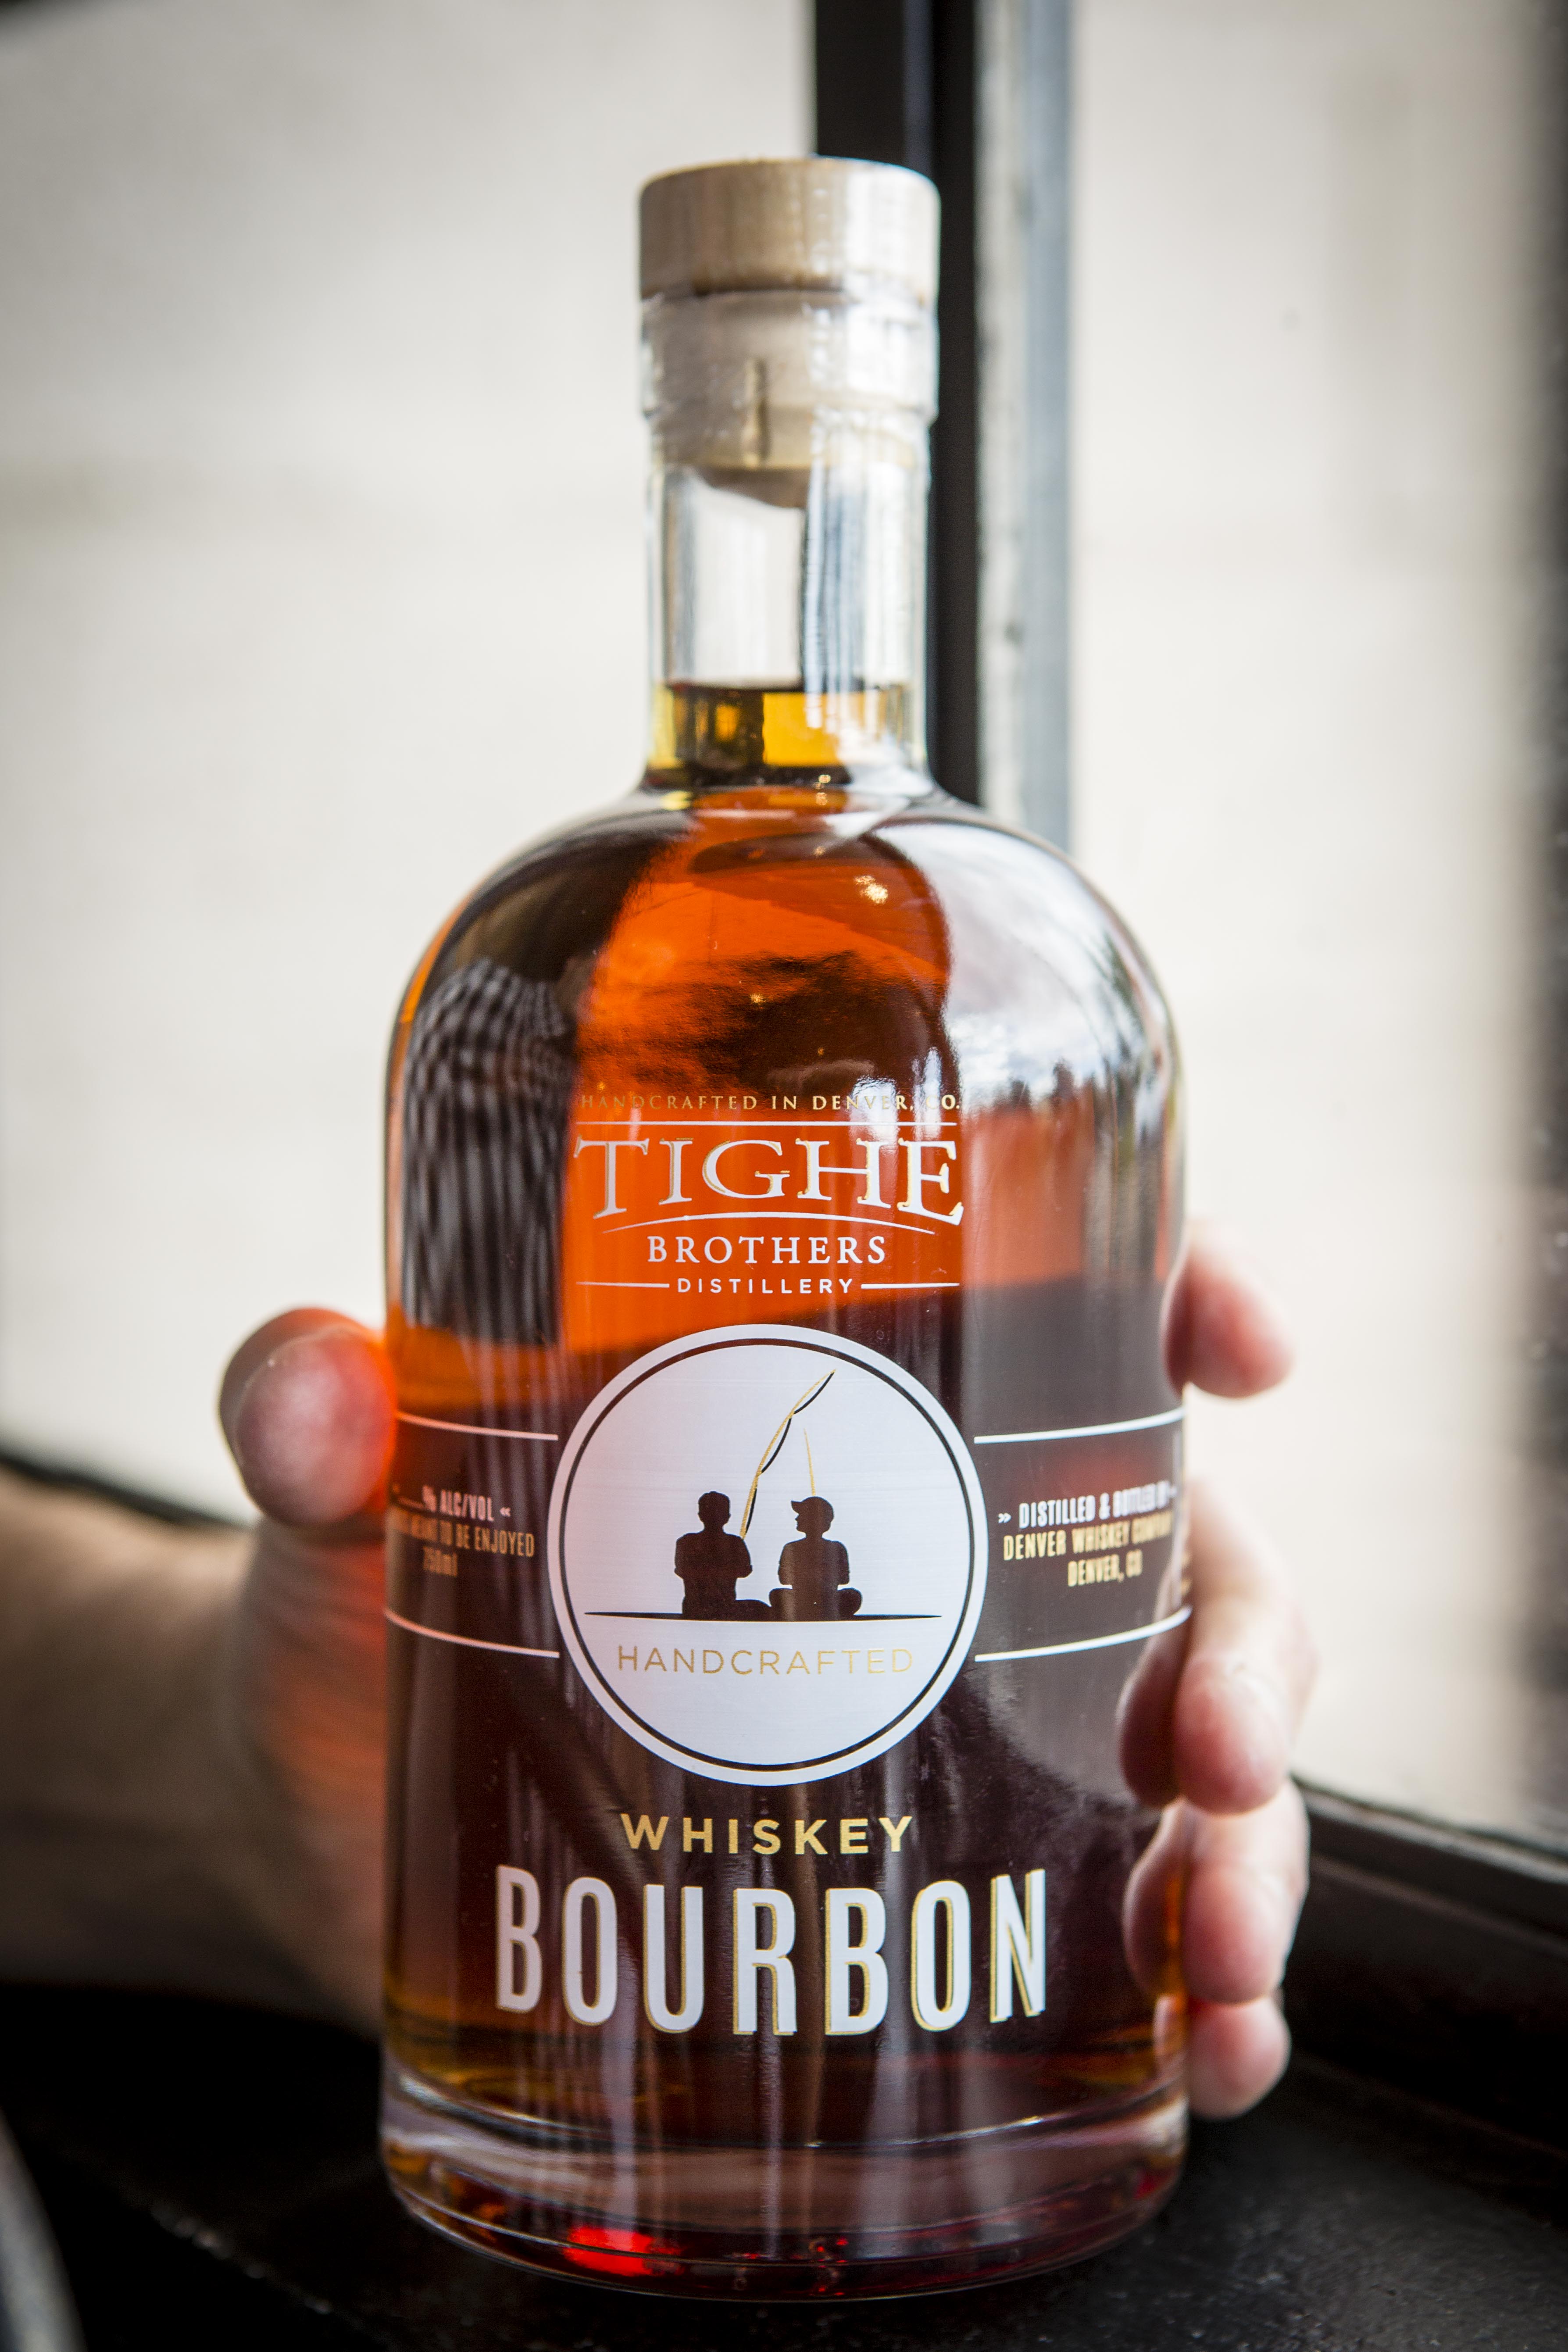 Tighe Brothers Distillery, Tighe Brothers, Whiskey Distillery, Park Hill, Local bar, Denver bar, Denver, Whiskey, Small Business, Katie Boudreau, Drinks, Bourbon, Brewery, Barrel Smoked Maple Syrup. Old Fashion,